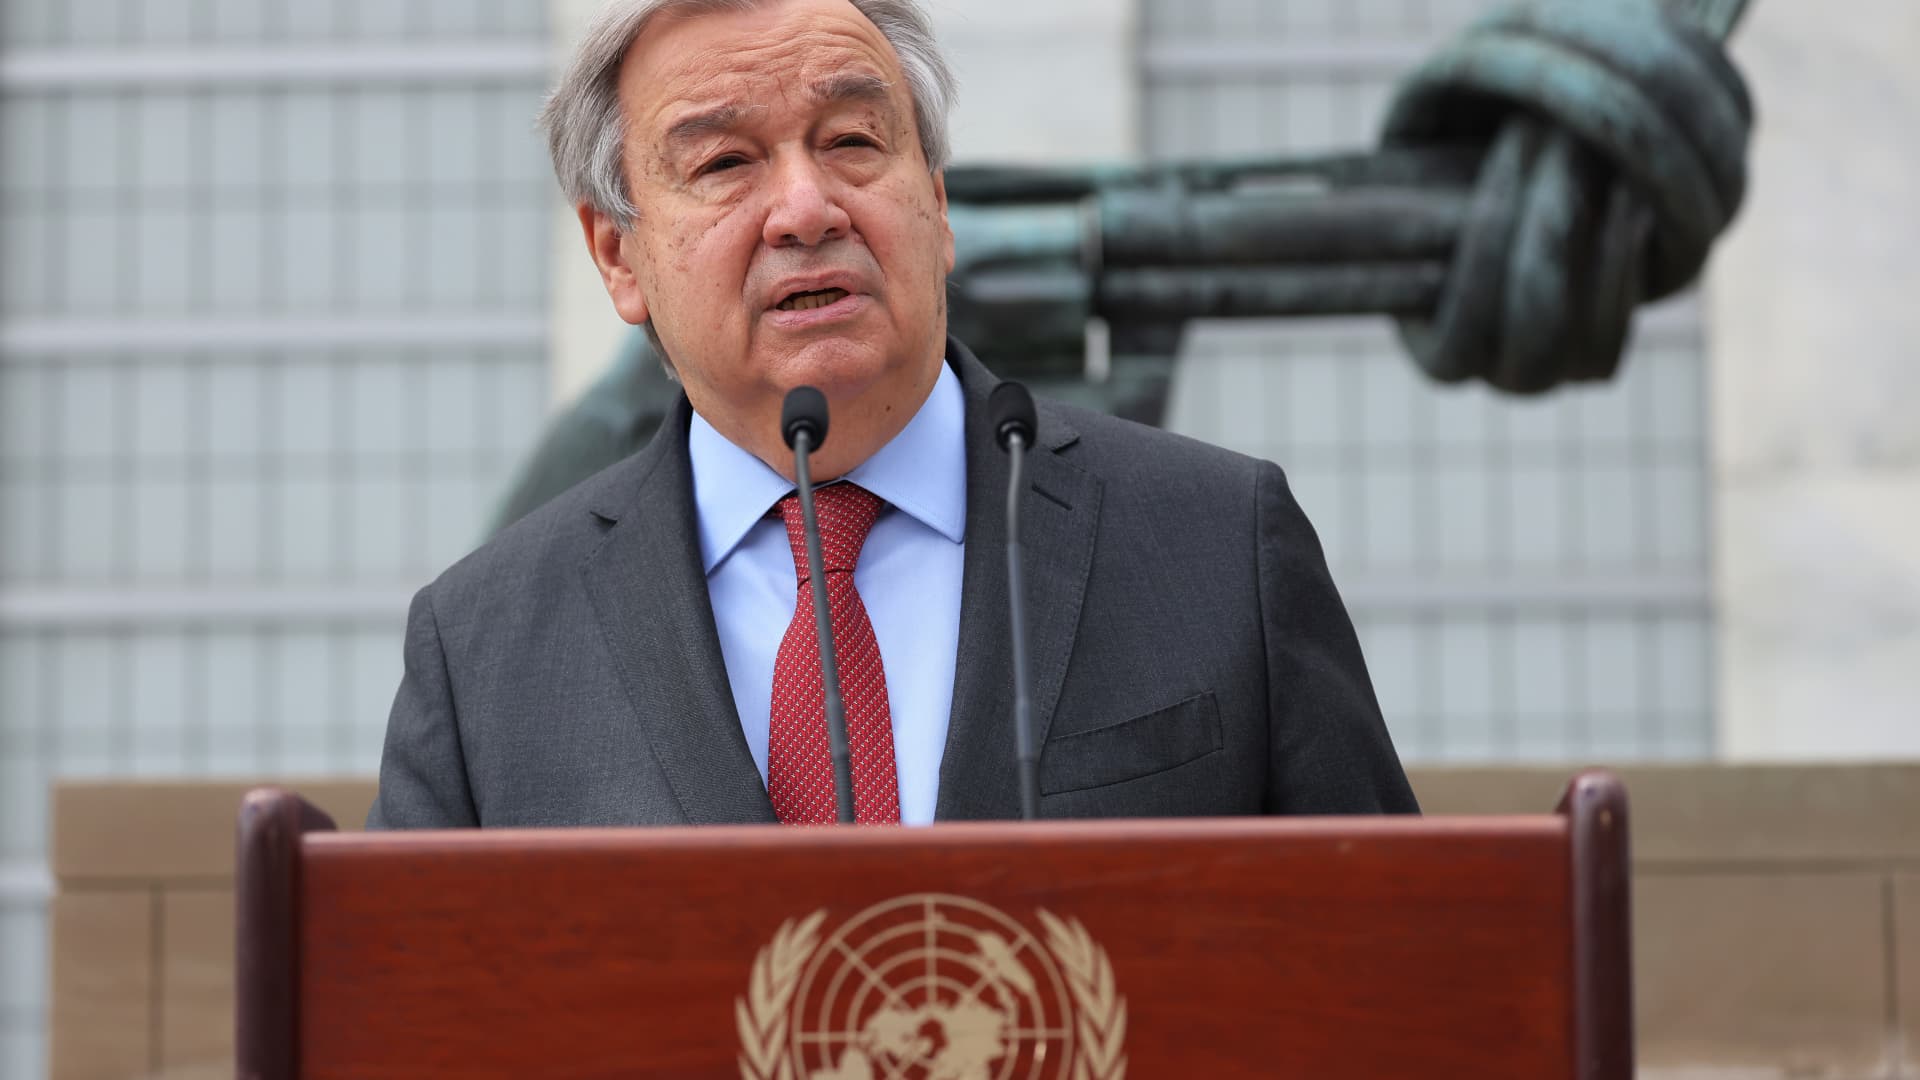 UN chief slams new fossil fuel funding